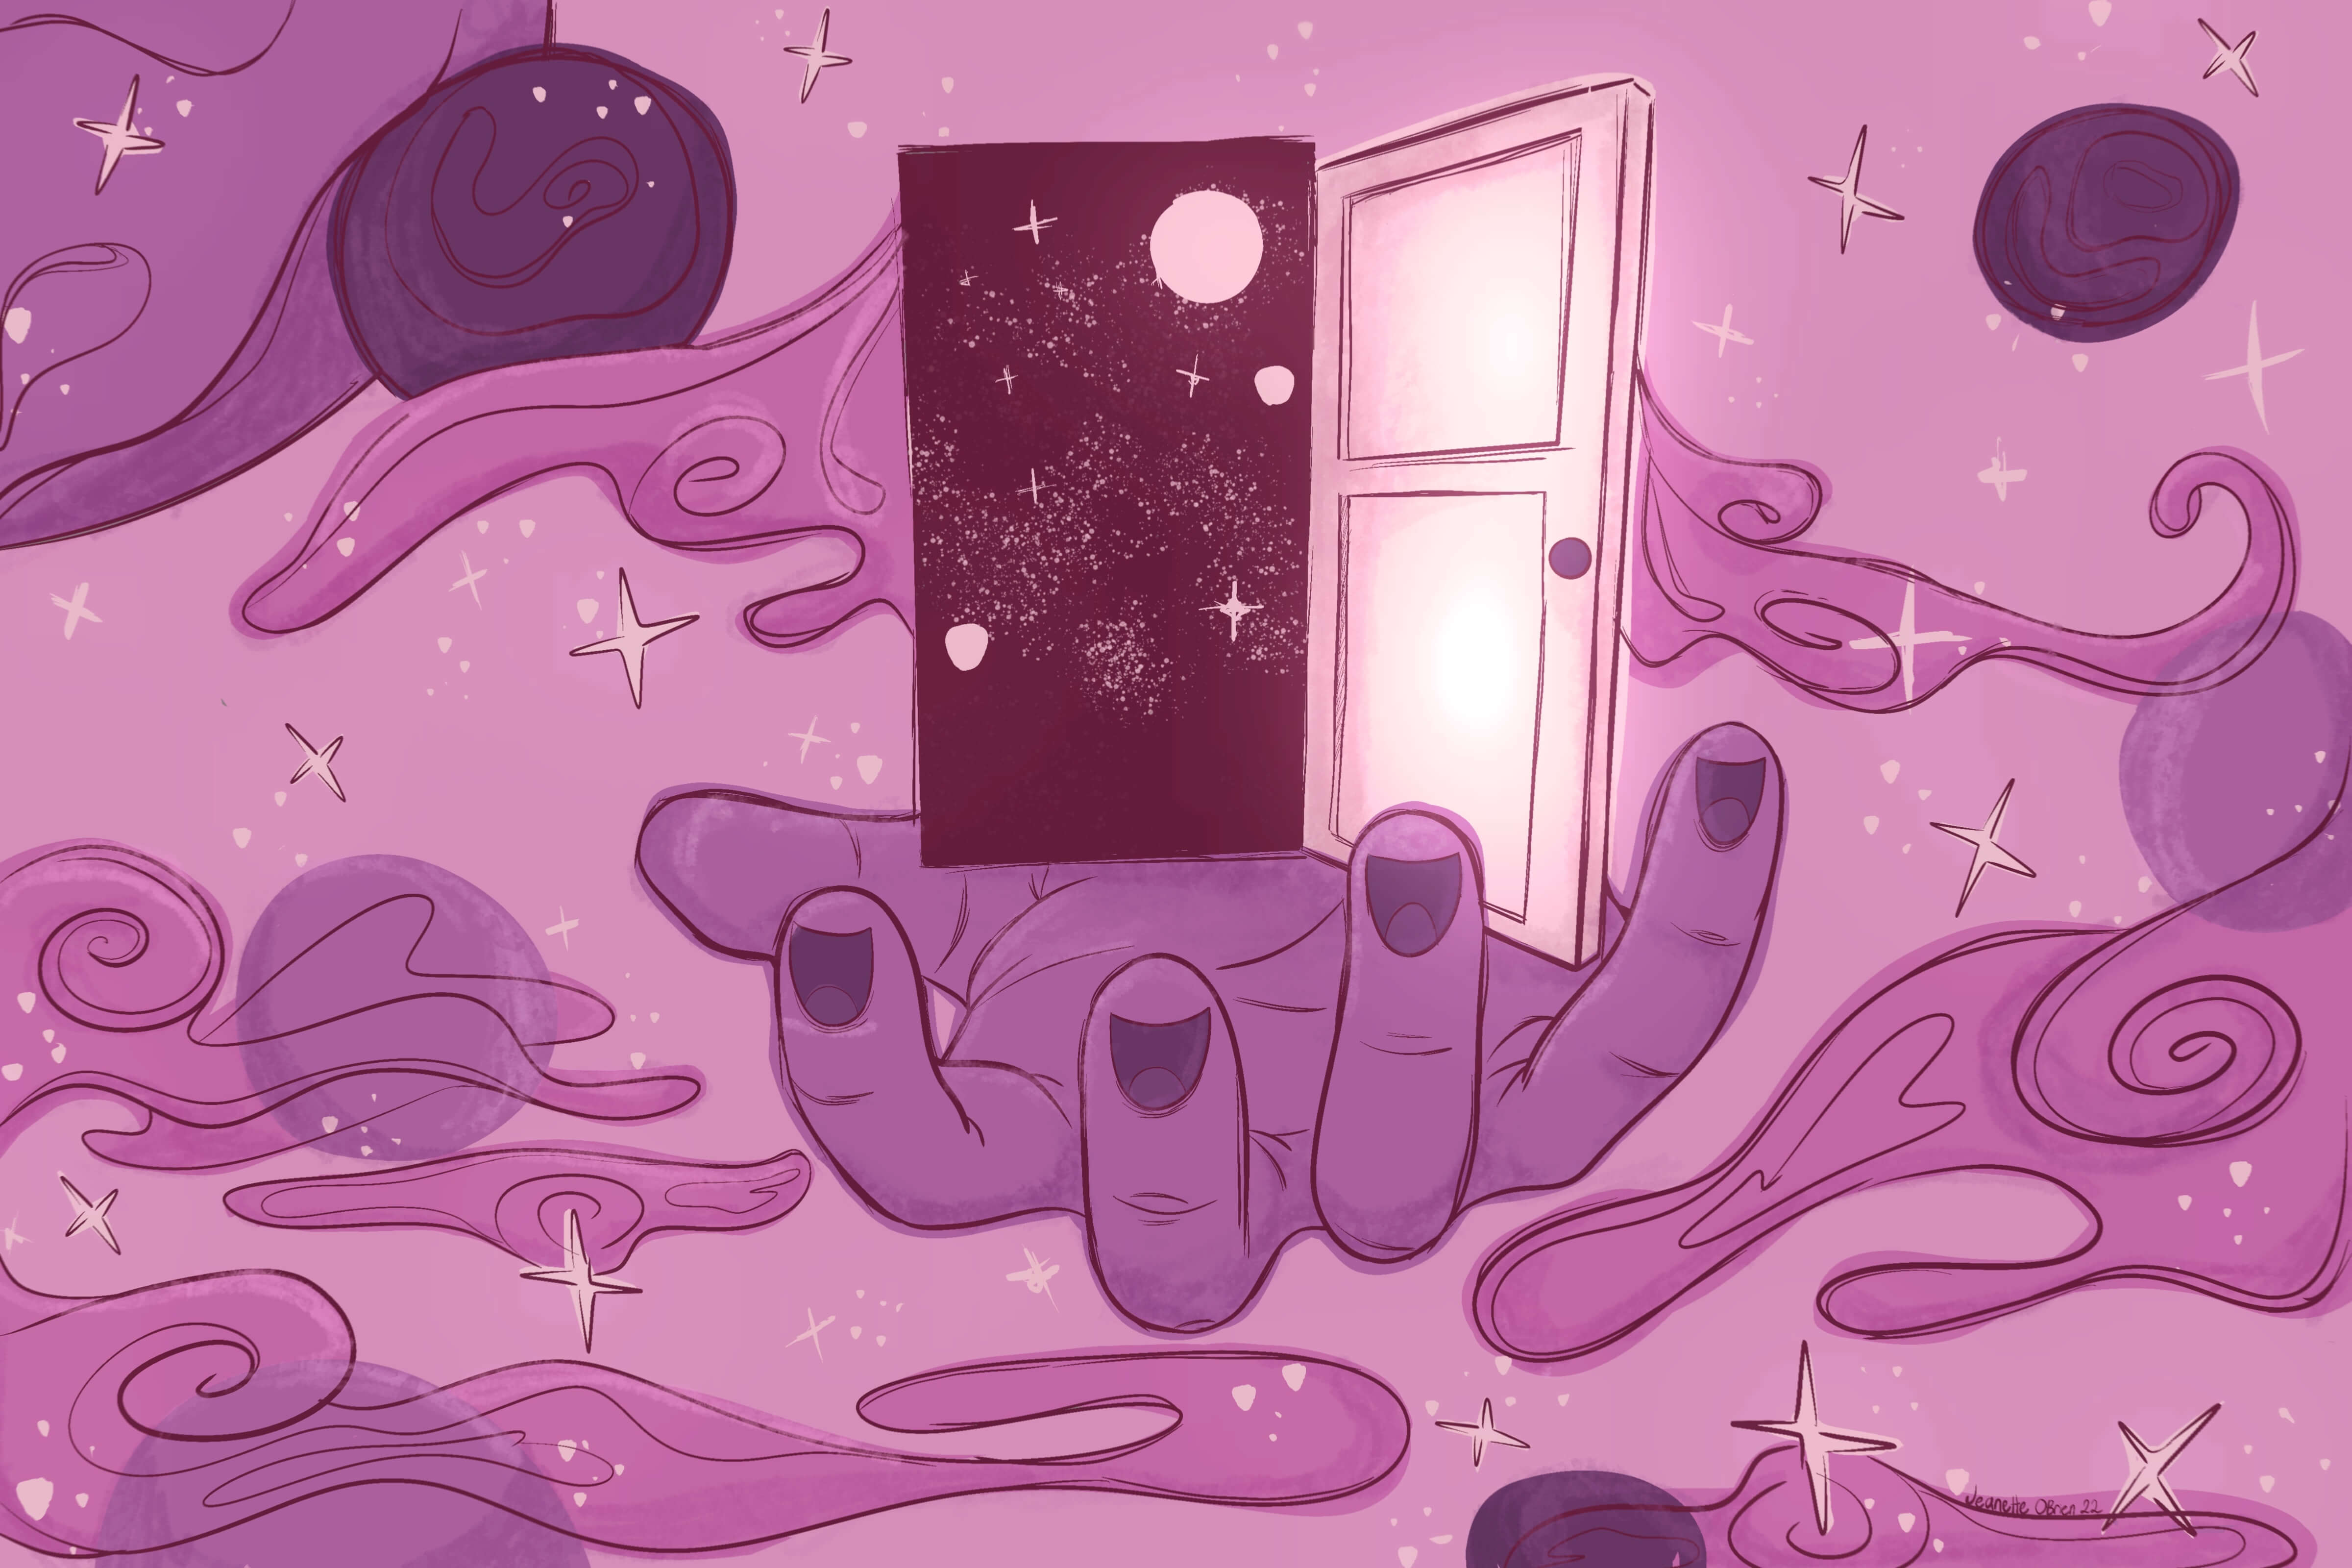 surrealist image mostly monochromatic cool lavender and pink, image depicts outstretched hand with an open door way set in the backdrop of a swirling stylized universe